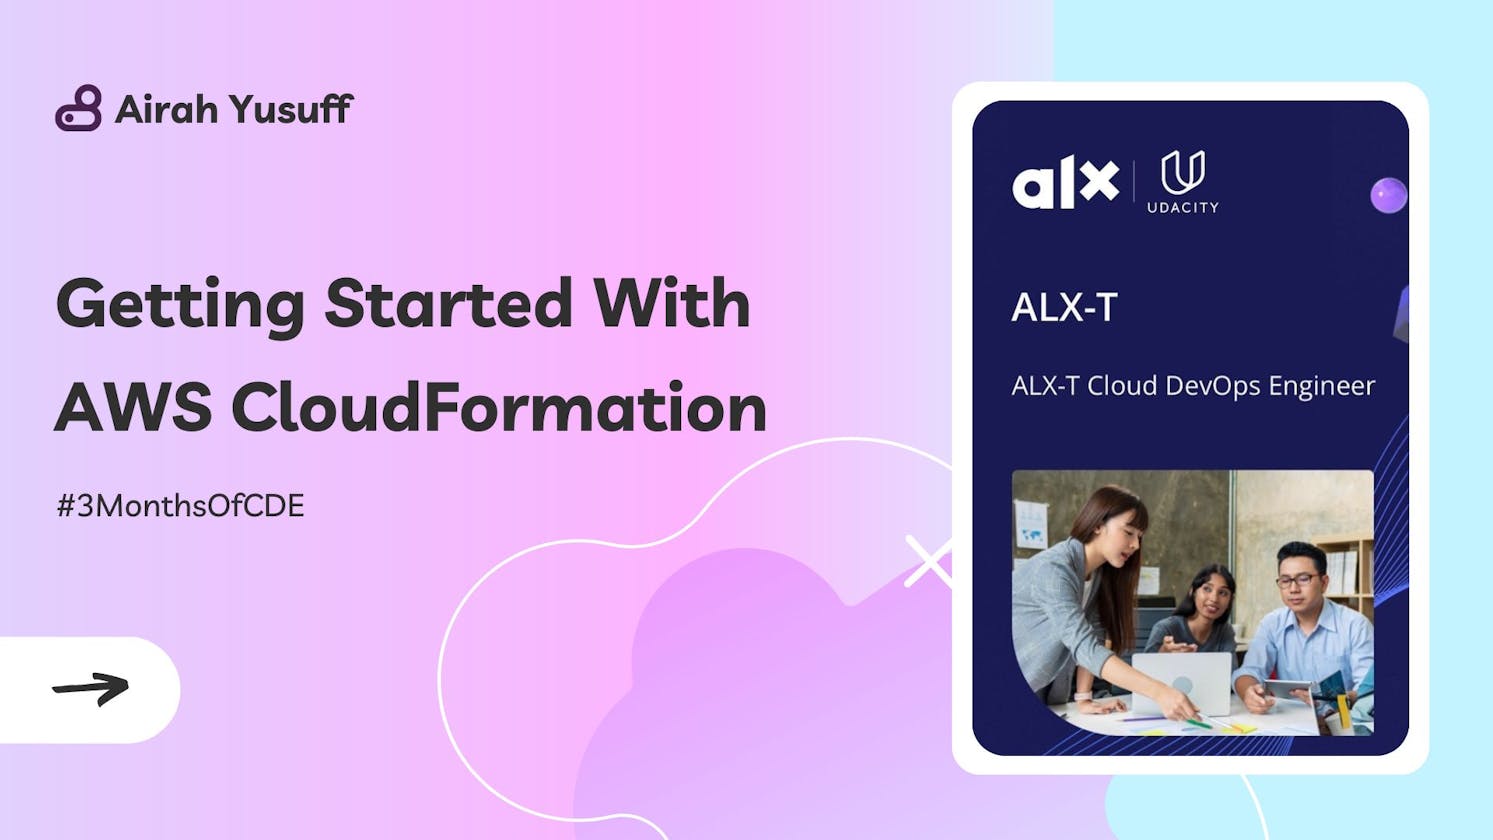 Week 2 - Getting Started with AWS CloudFormation